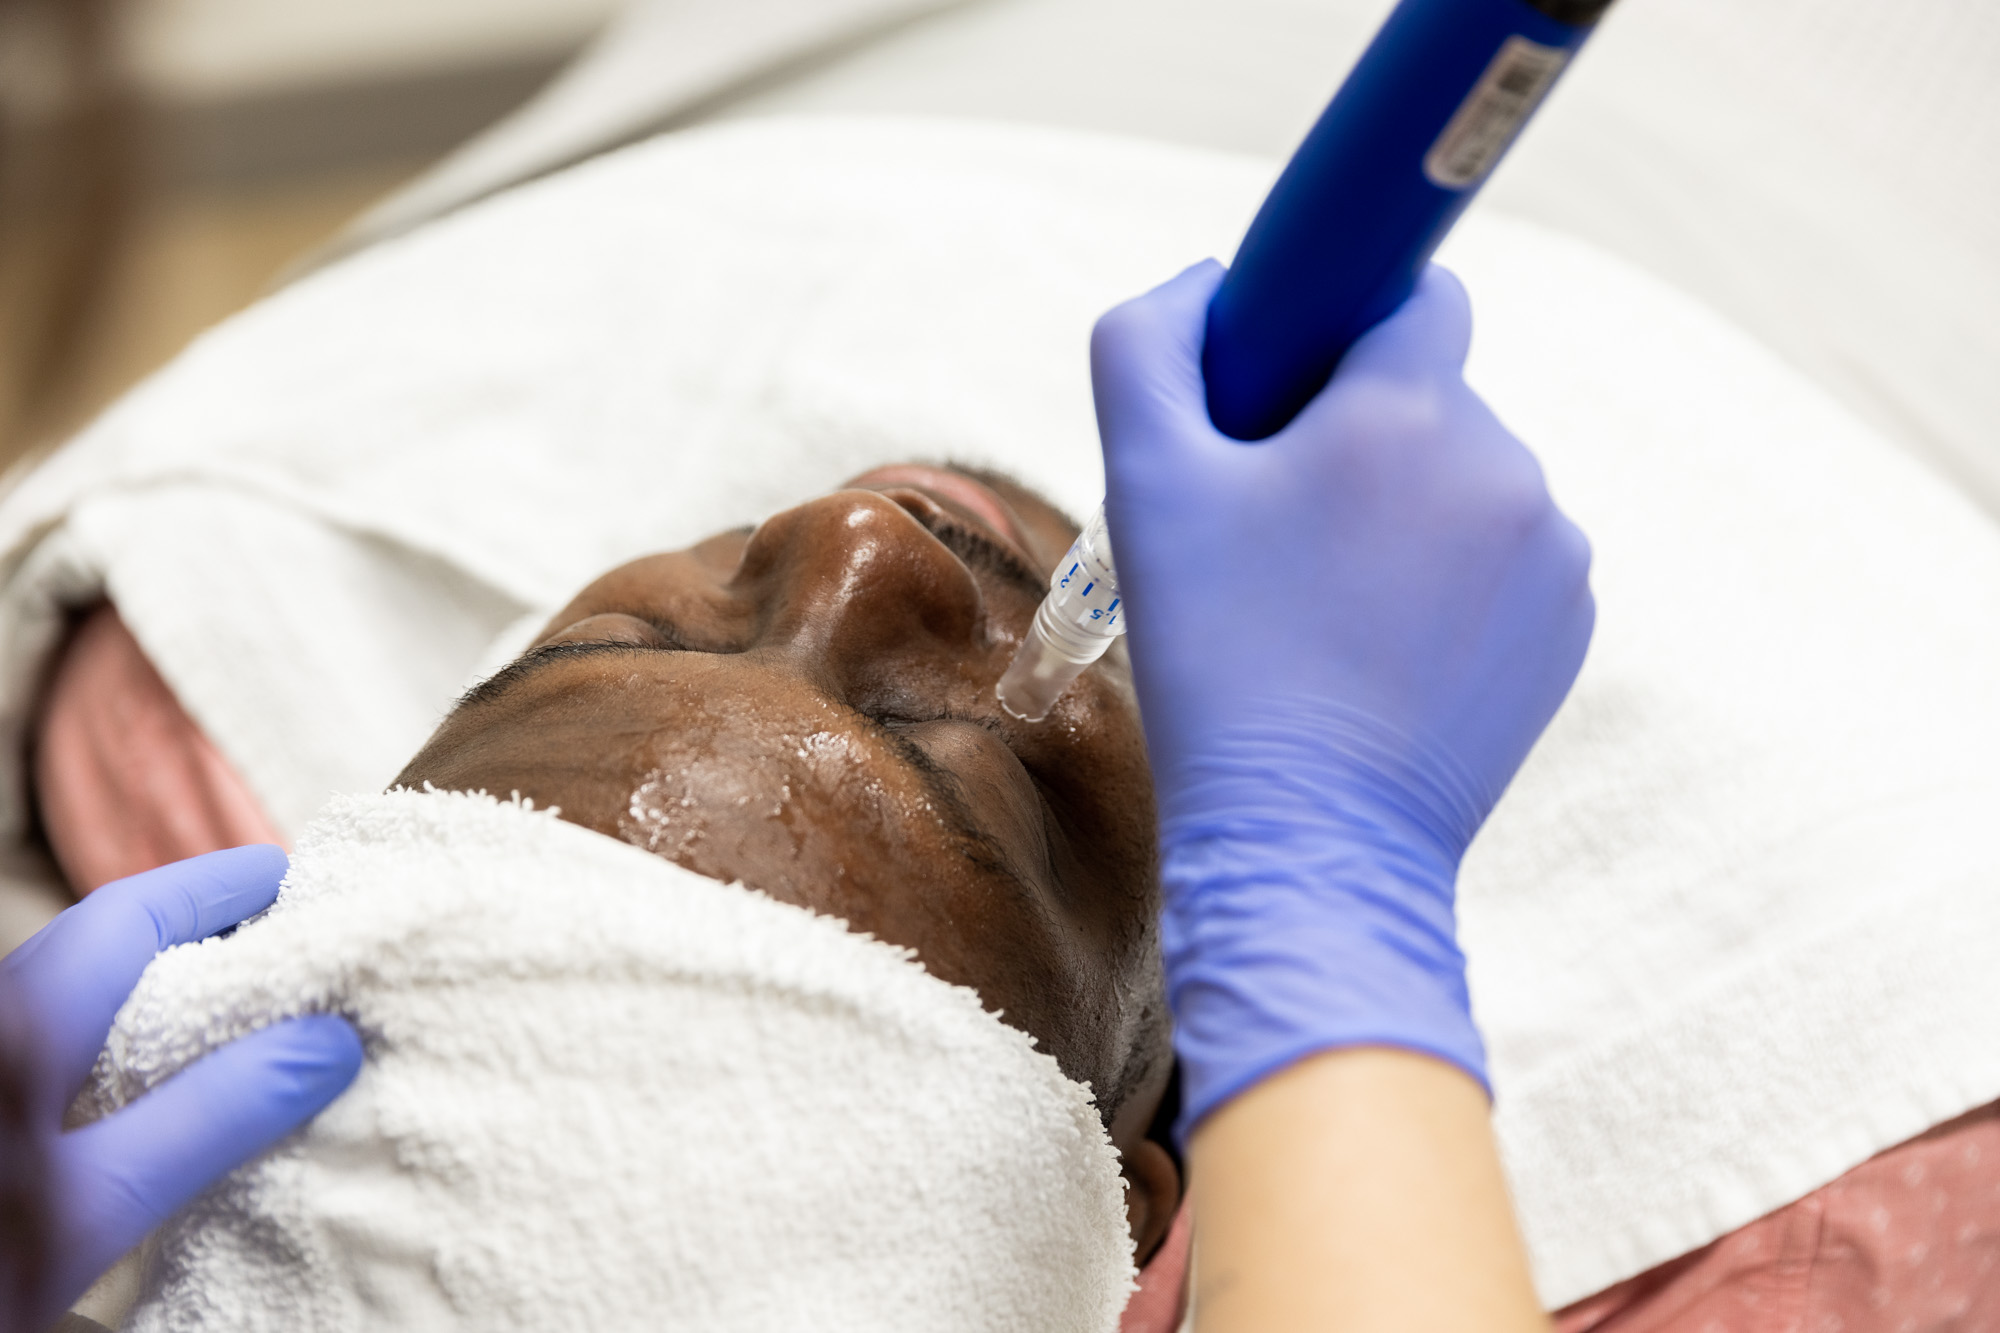 A medical professional holds up a pen-like applicator to a male patient's face during a facial.